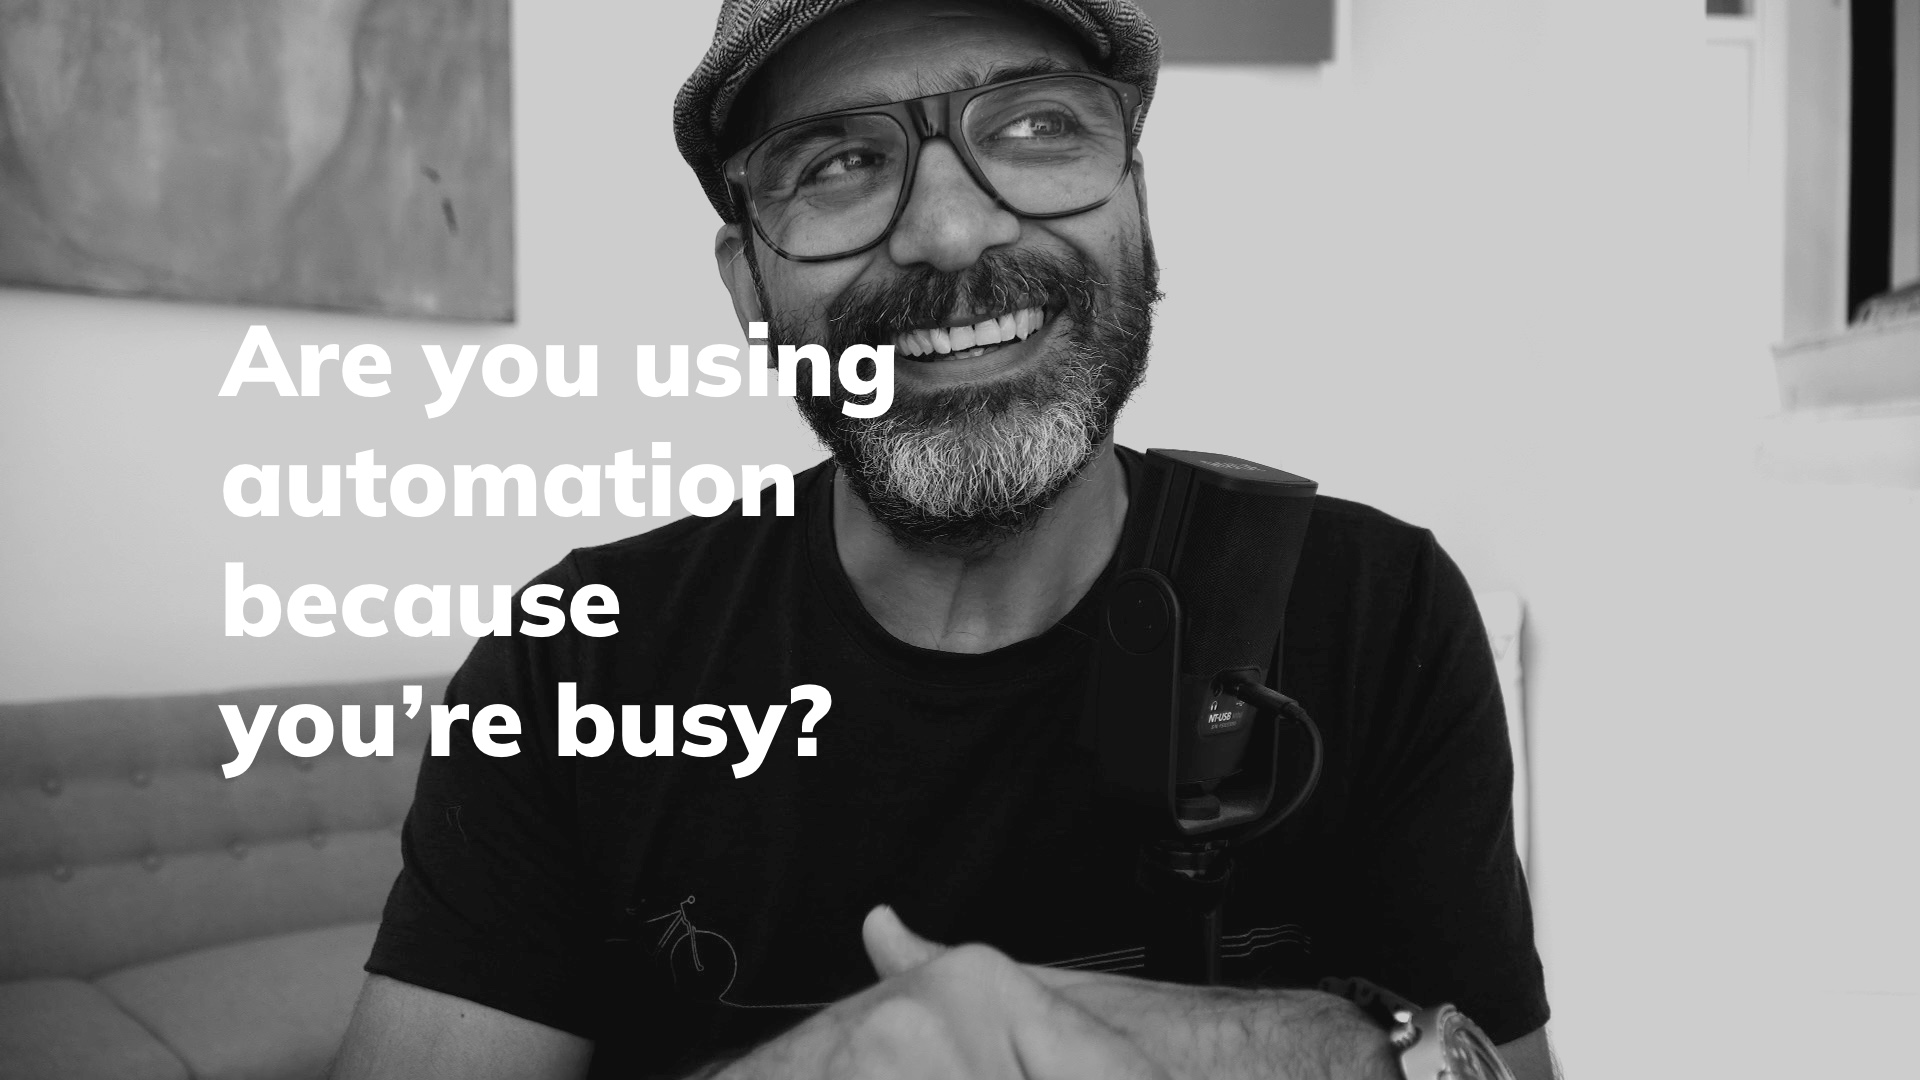 Are you using automation because you’re busy?